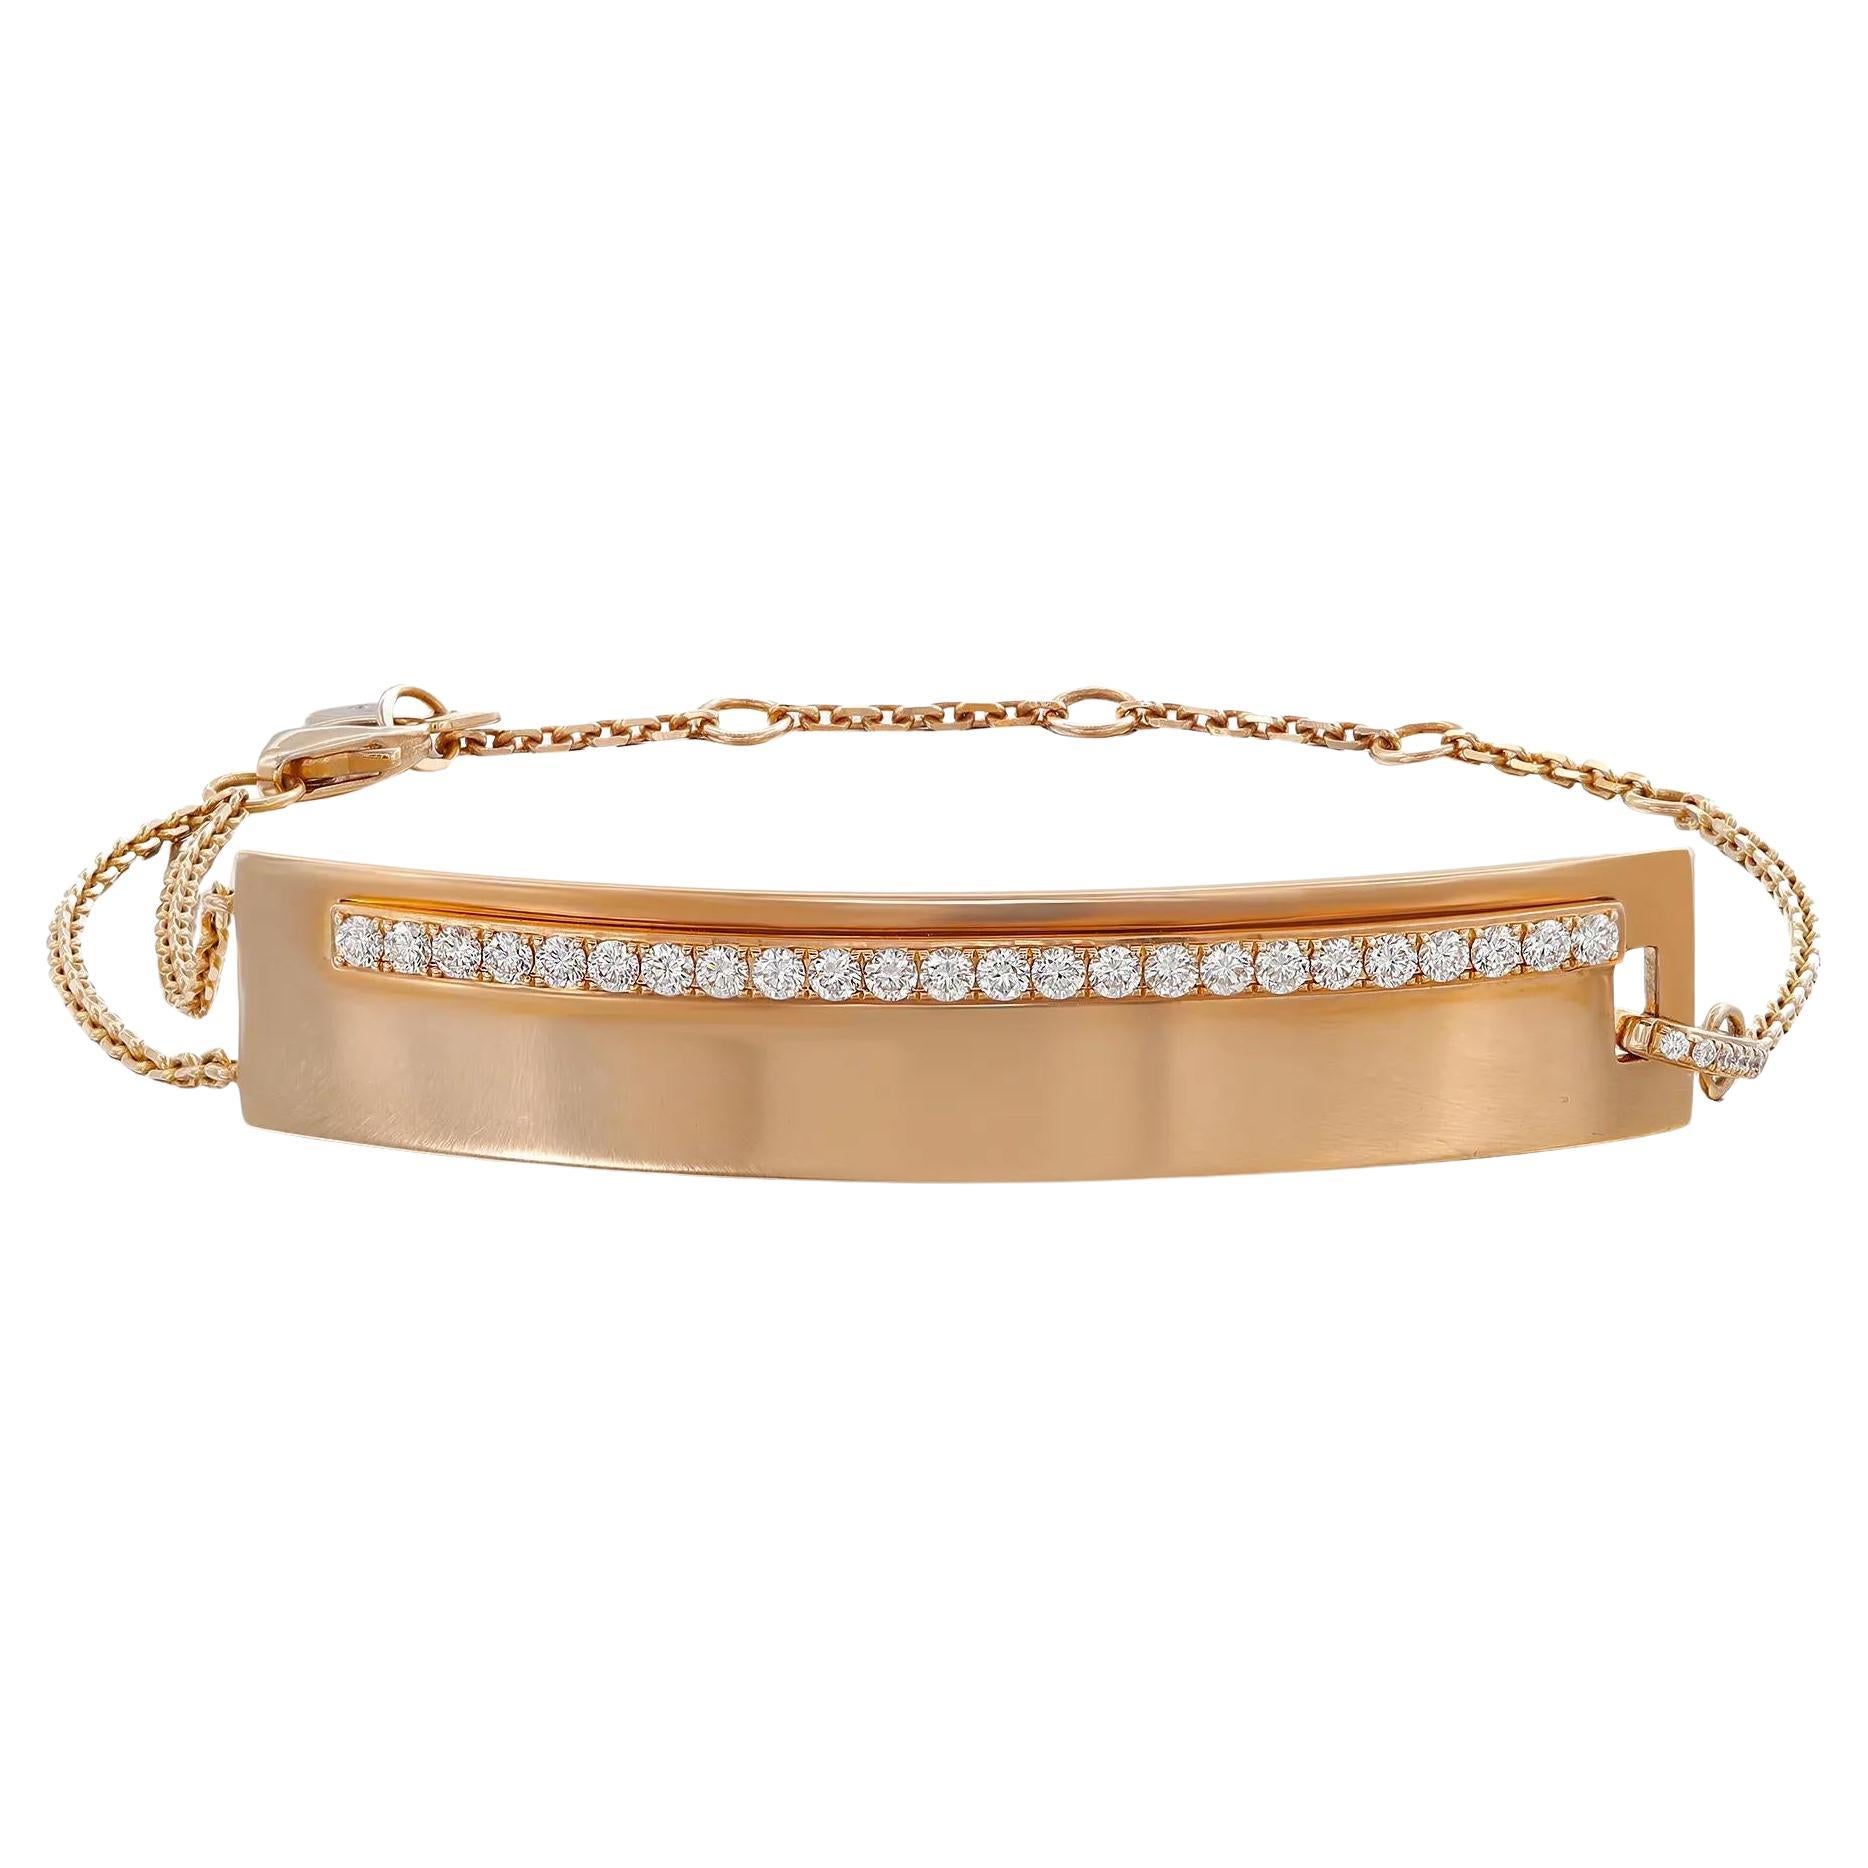 Messika 0.44Cttw Kate Diamond Chain Bracelet 18K Rose Gold 7.5 Inches For Sale